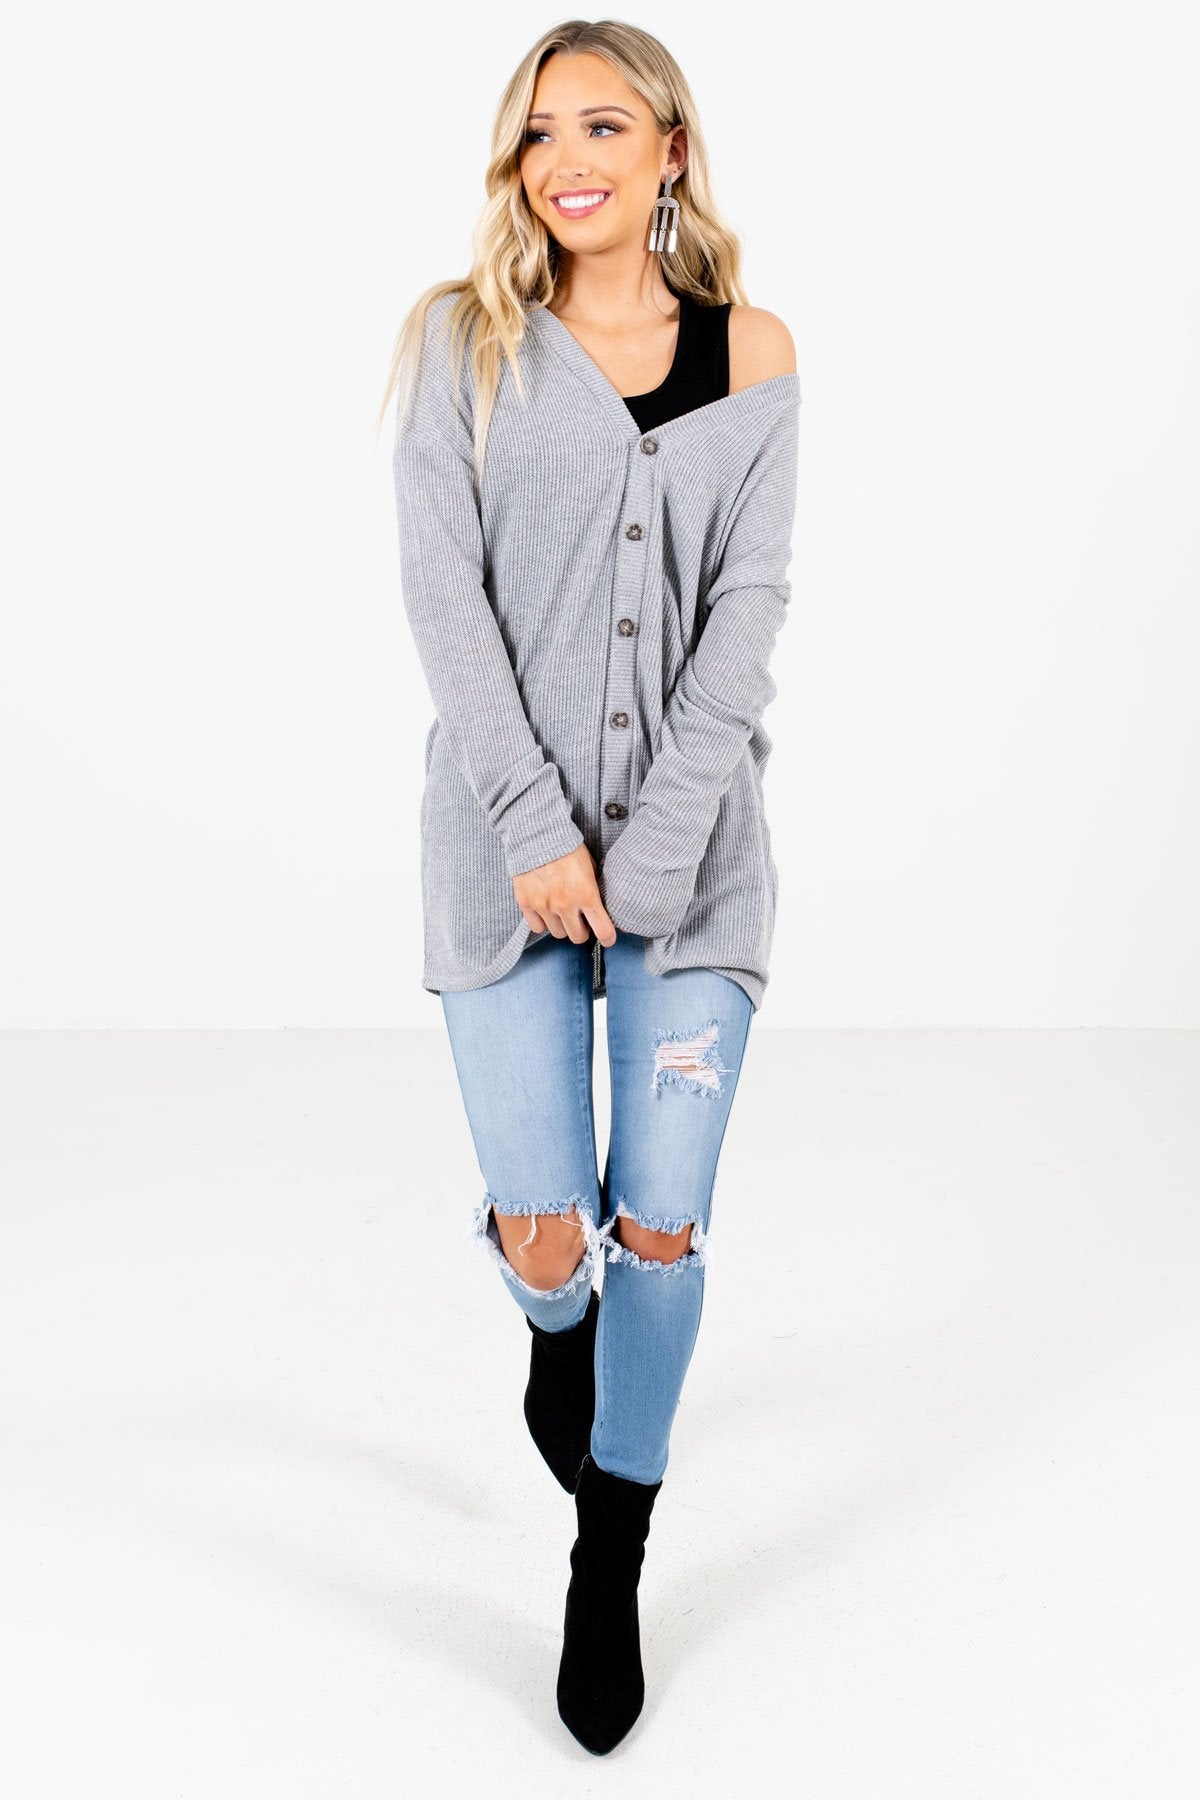 Heather Gray Cute and Comfortable Boutique Tops for Women